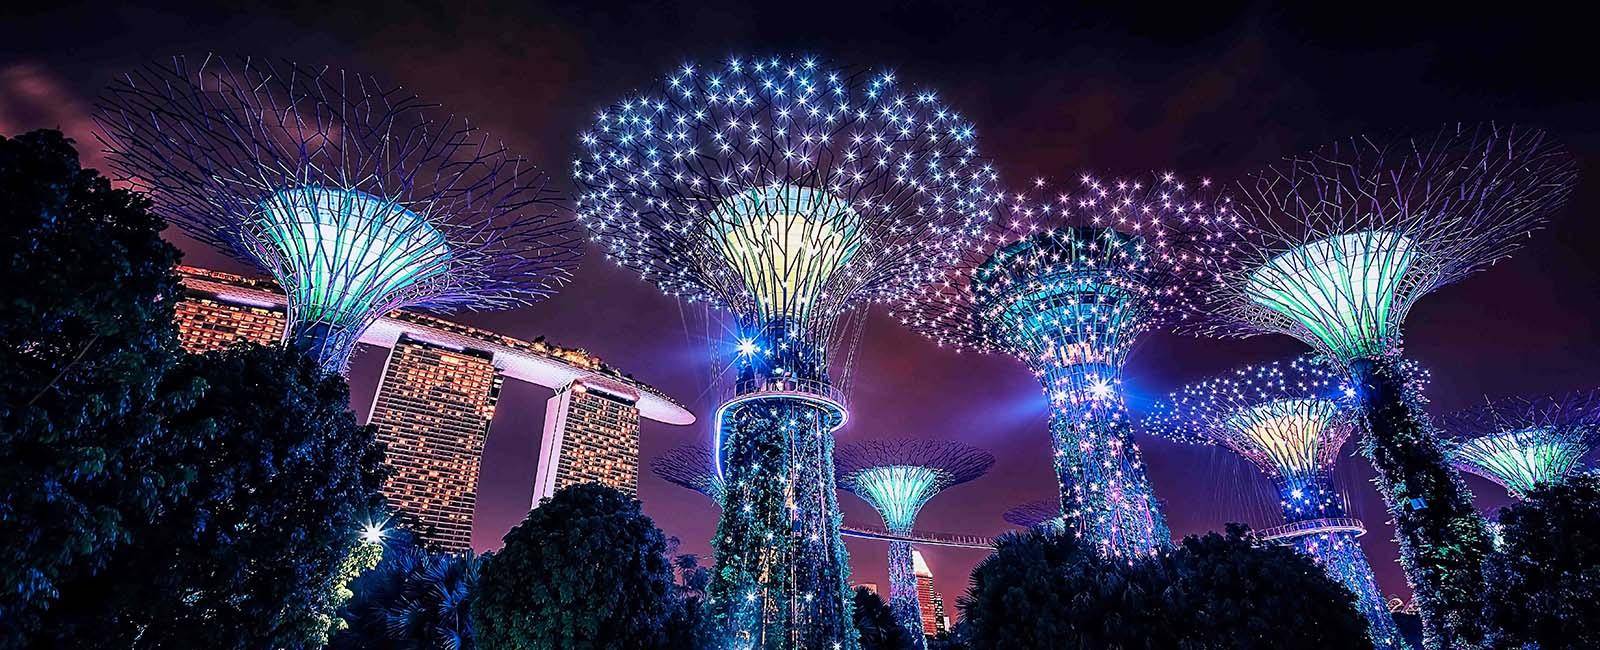 View of Singapore at night - Gardens by the Bay and Marina Bay Sands